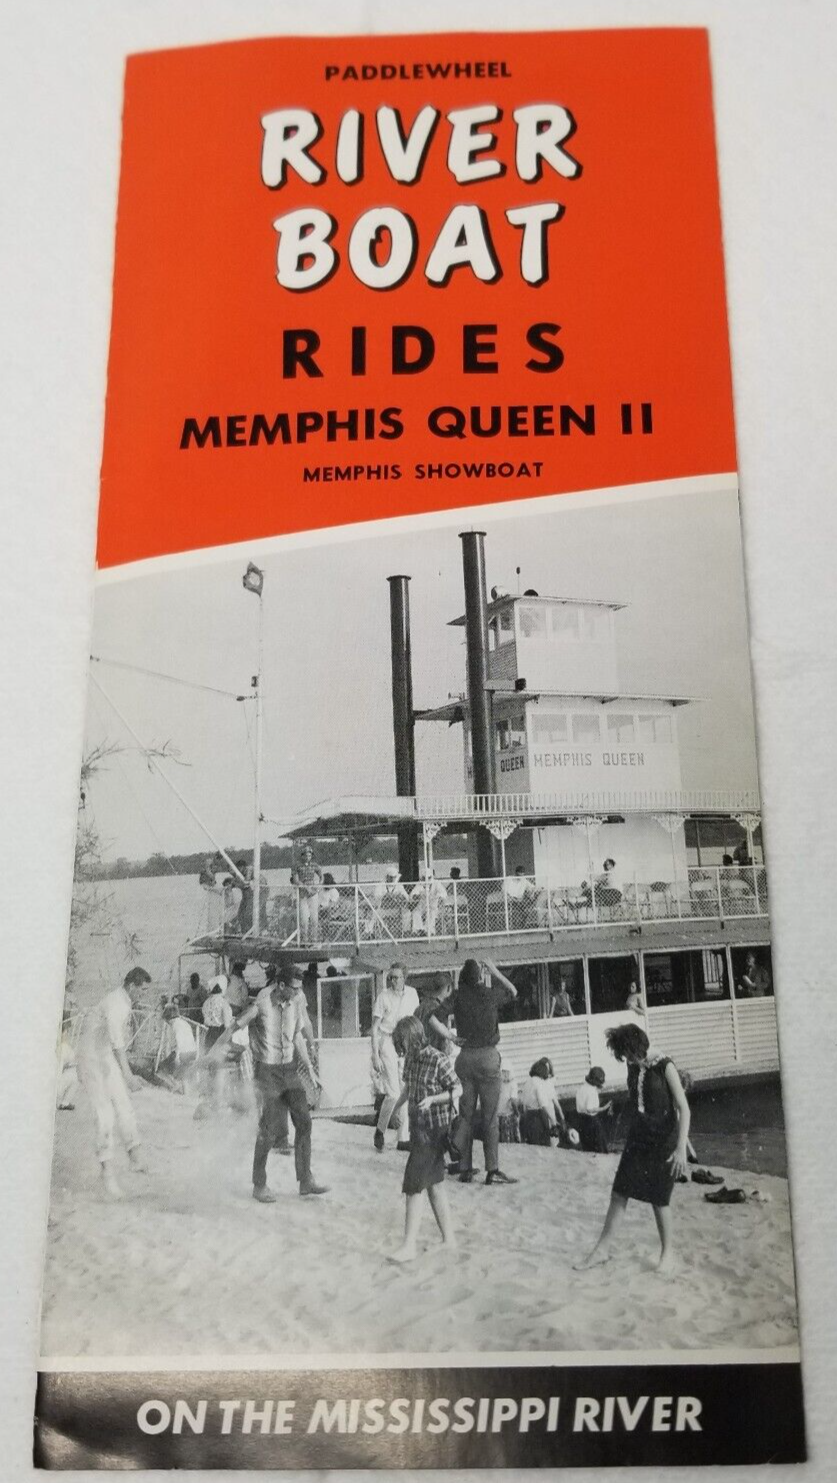 Primary image for Memphis Queen II River Boat Rides Brochure 1959 Capt. Meanly Paddlewheel